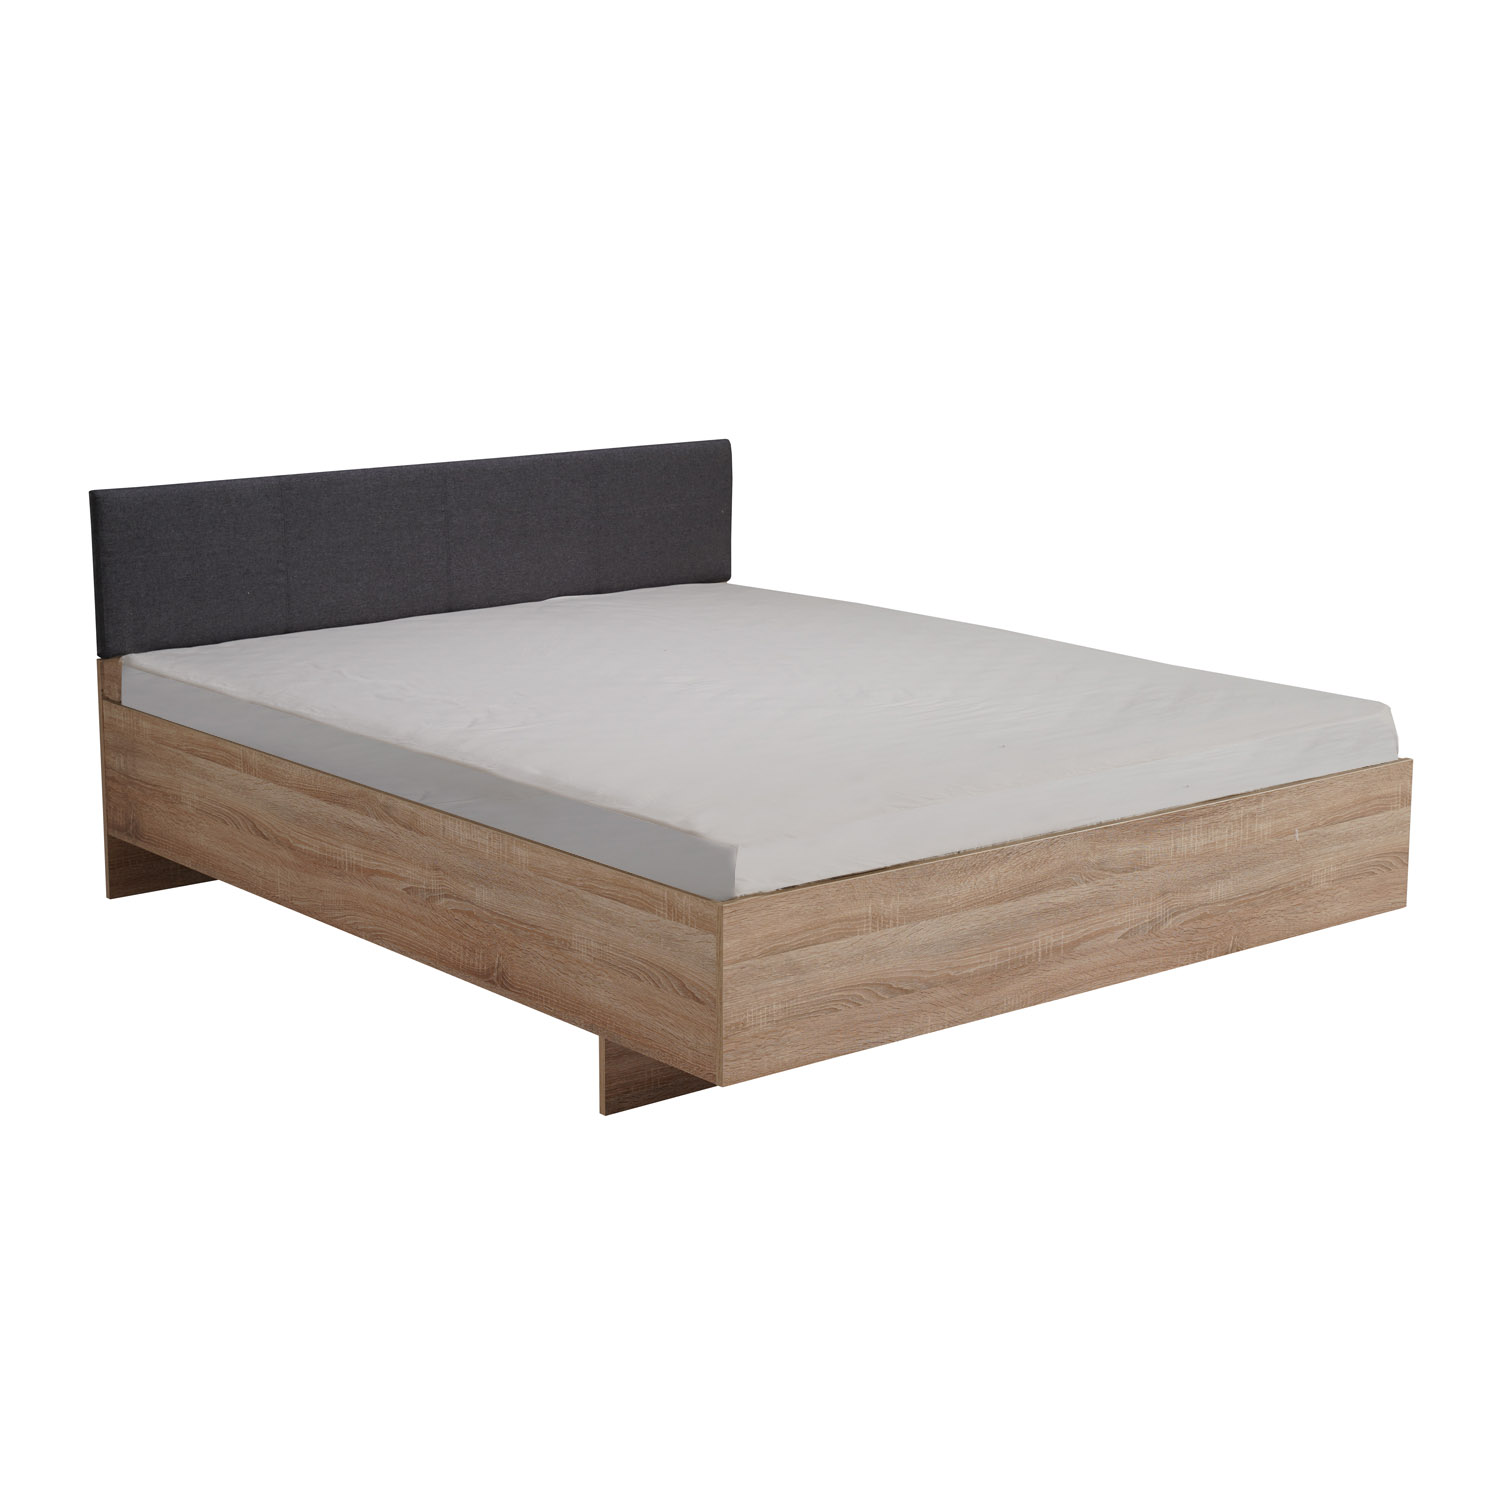 Double Bed Wooden Frame Upholstered Bed 160x200 cm with Slats Grey Fabric